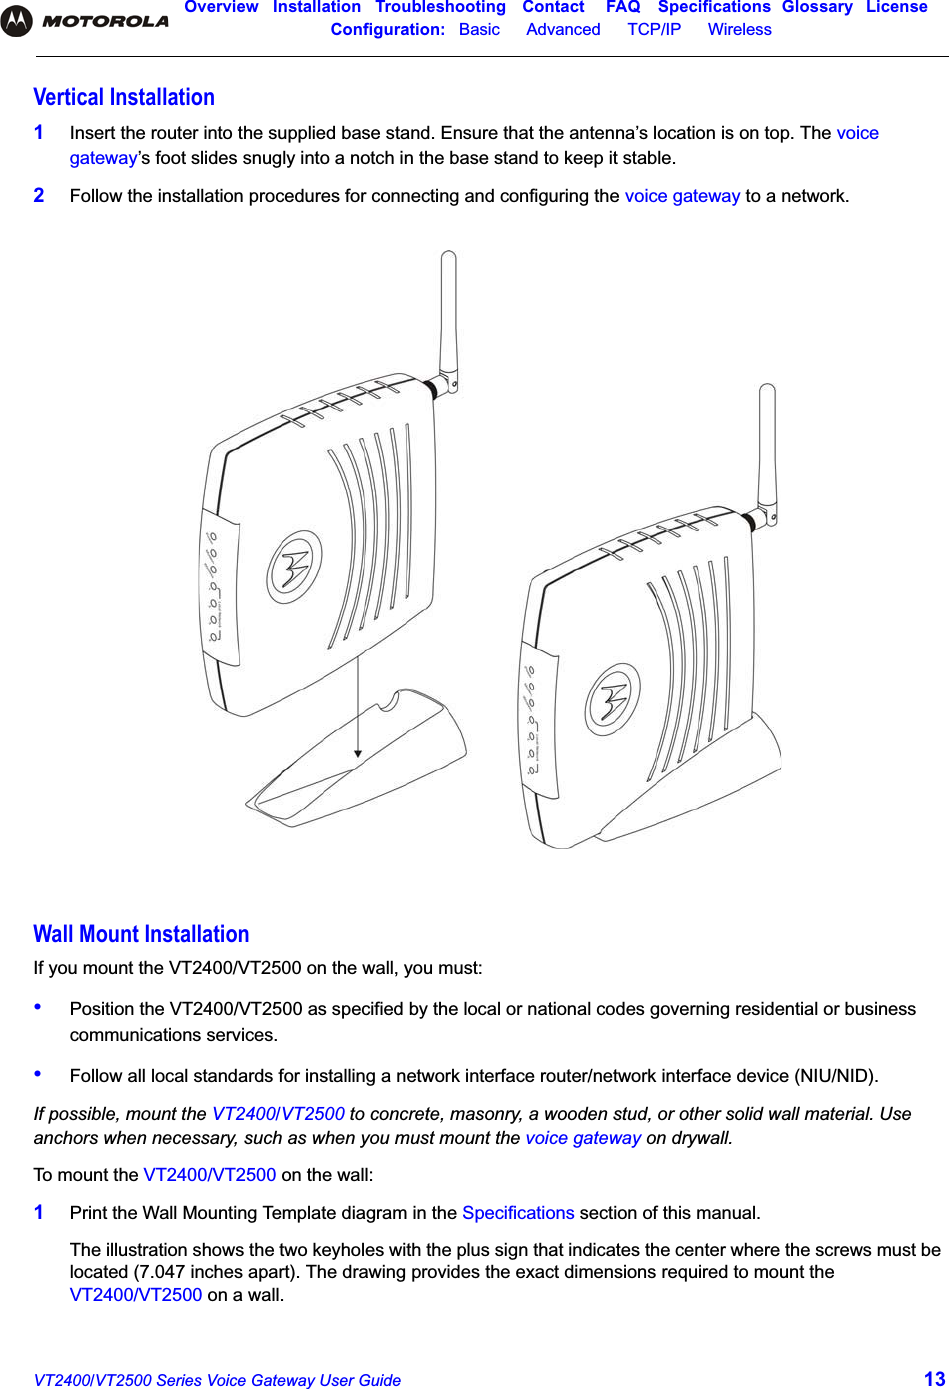 Overview Installation Troubleshooting Contact FAQ Specifications Glossary LicenseConfiguration:   Basic      Advanced      TCP/IP      Wireless VT2400/VT2500 Series Voice Gateway User Guide 13Vertical Installation1Insert the router into the supplied base stand. Ensure that the antenna’s location is on top. The voice gateway’s foot slides snugly into a notch in the base stand to keep it stable.2Follow the installation procedures for connecting and configuring the voice gateway to a network.Wall Mount InstallationIf you mount the VT2400/VT2500 on the wall, you must:•Position the VT2400/VT2500 as specified by the local or national codes governing residential or business communications services.•Follow all local standards for installing a network interface router/network interface device (NIU/NID).If possible, mount the VT2400/VT2500 to concrete, masonry, a wooden stud, or other solid wall material. Use anchors when necessary, such as when you must mount the voice gateway on drywall.To mount the VT2400/VT2500 on the wall:1Print the Wall Mounting Template diagram in the Specifications section of this manual.The illustration shows the two keyholes with the plus sign that indicates the center where the screws must be located (7.047 inches apart). The drawing provides the exact dimensions required to mount the VT2400/VT2500 on a wall. 